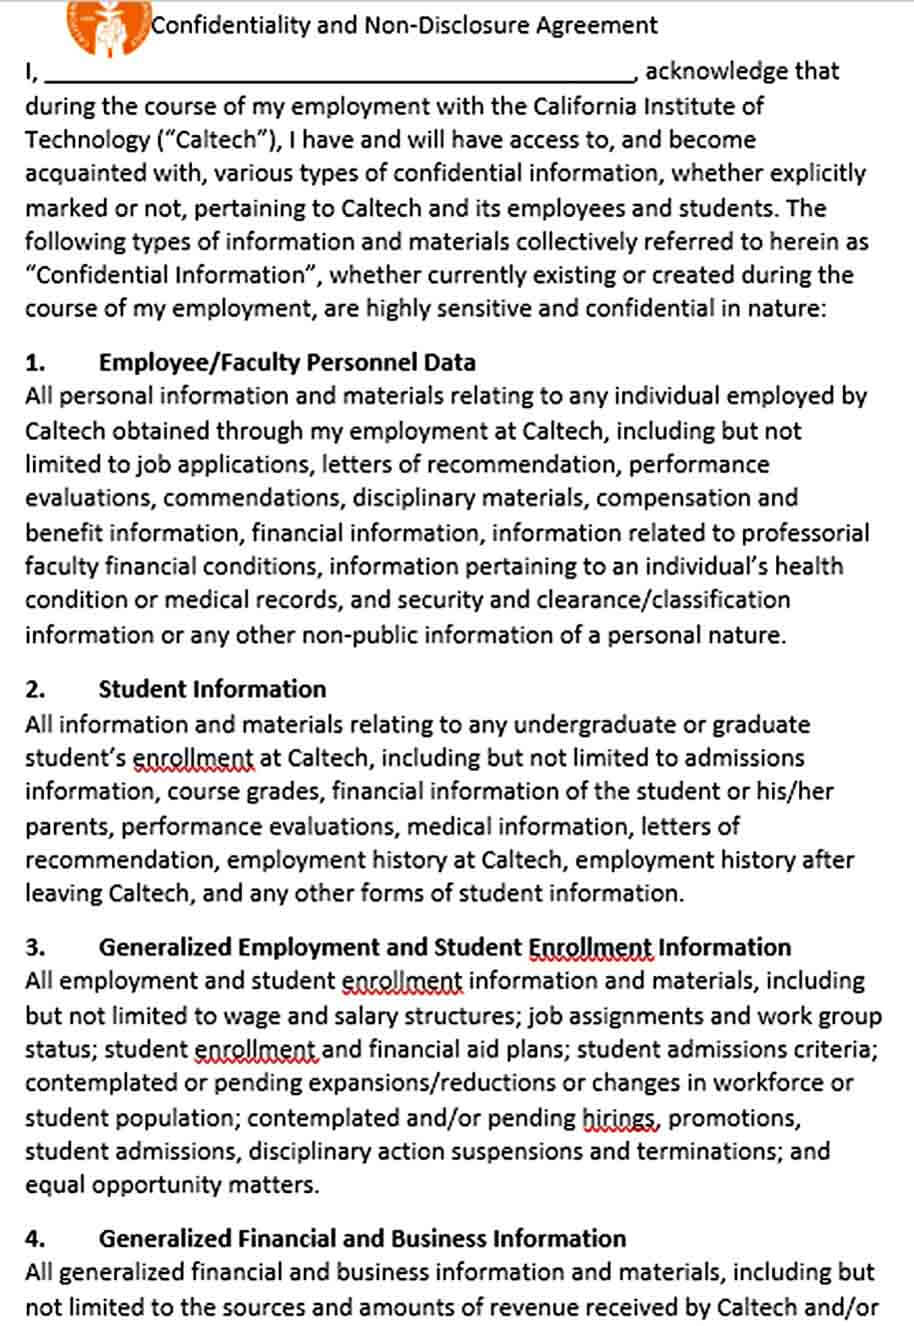 Sample University Audit Confidentiality Agreement Template